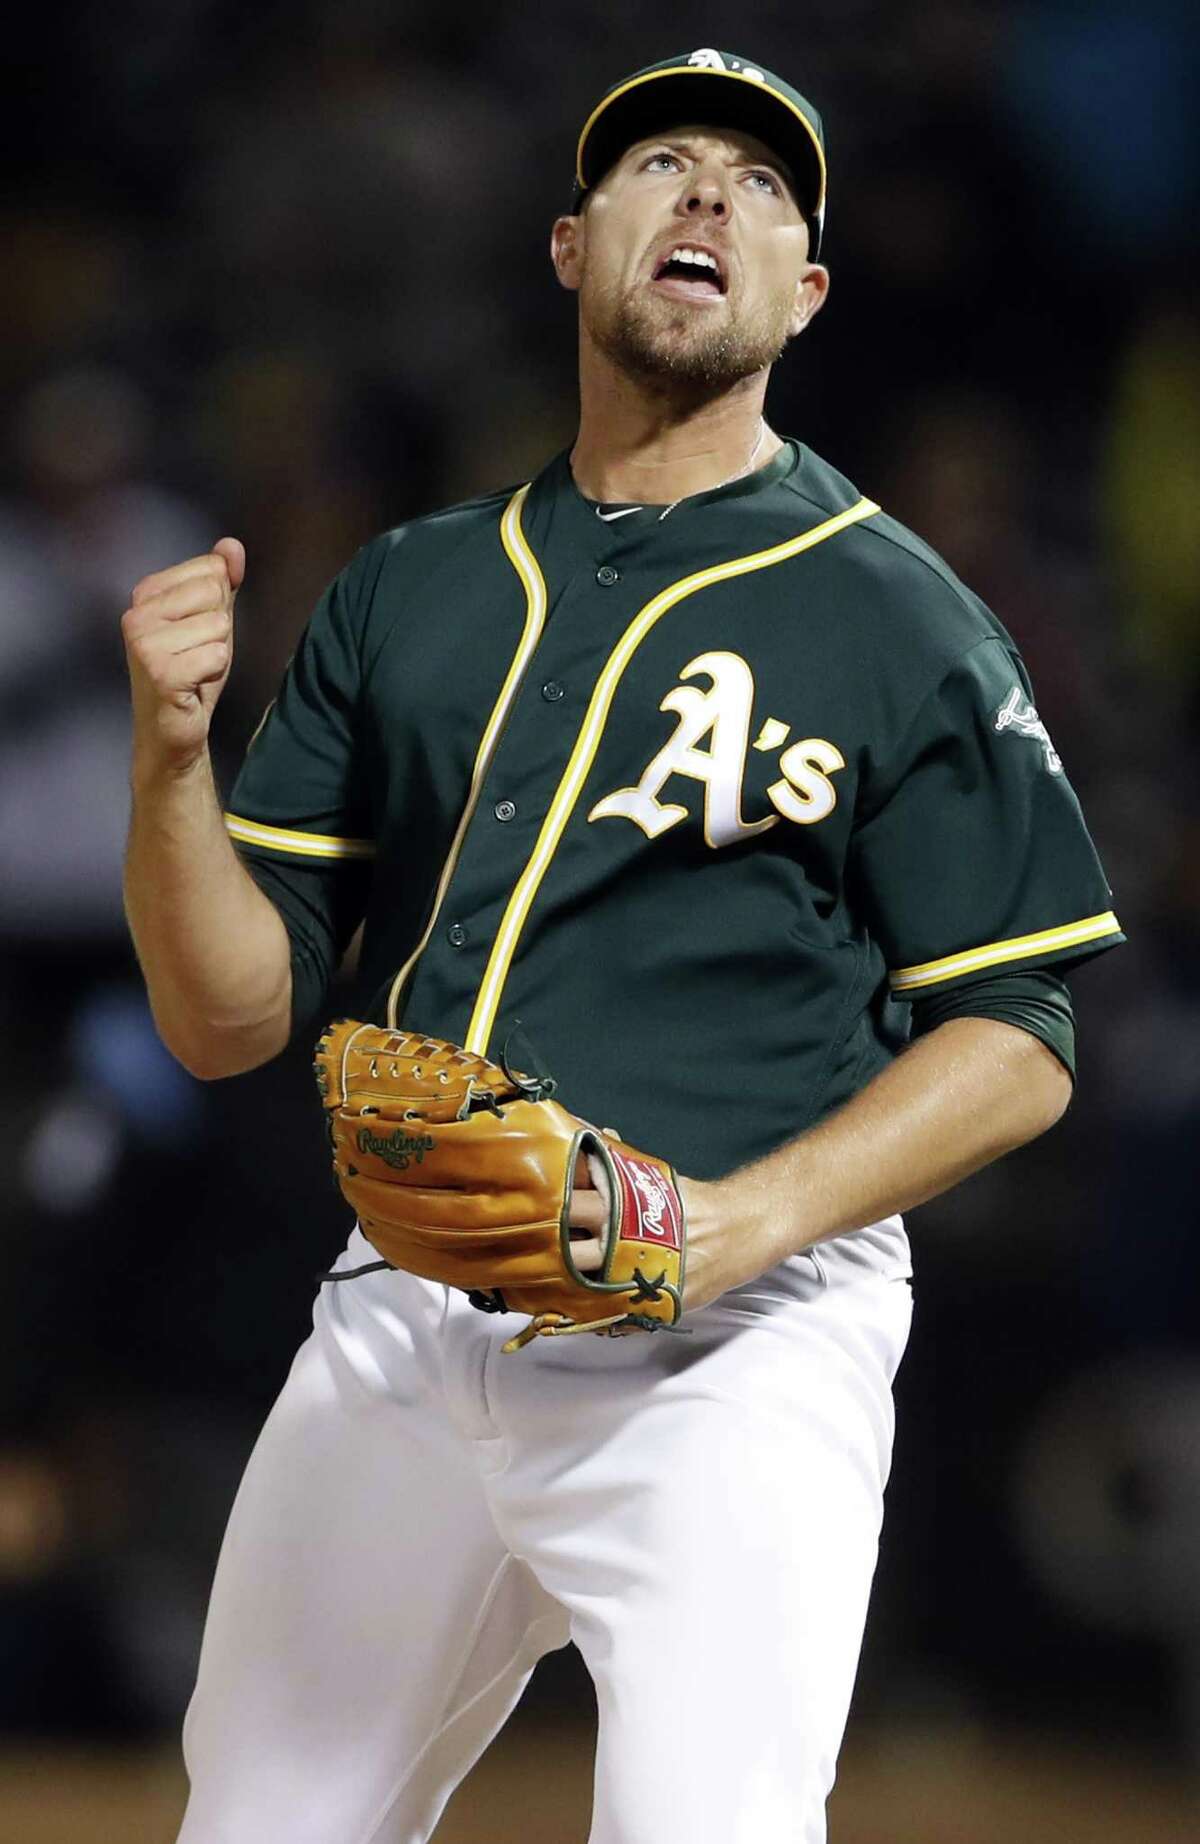 Oakland Athletics' Blake Treinen celebrates striking out Seattle Mariners' Nelson Cruz with the tying and go ahead runs on base to end A's 7-6 win in MLB game at Oakland Coliseum in Oakland, Calif. on Monday, August 13, 2018.